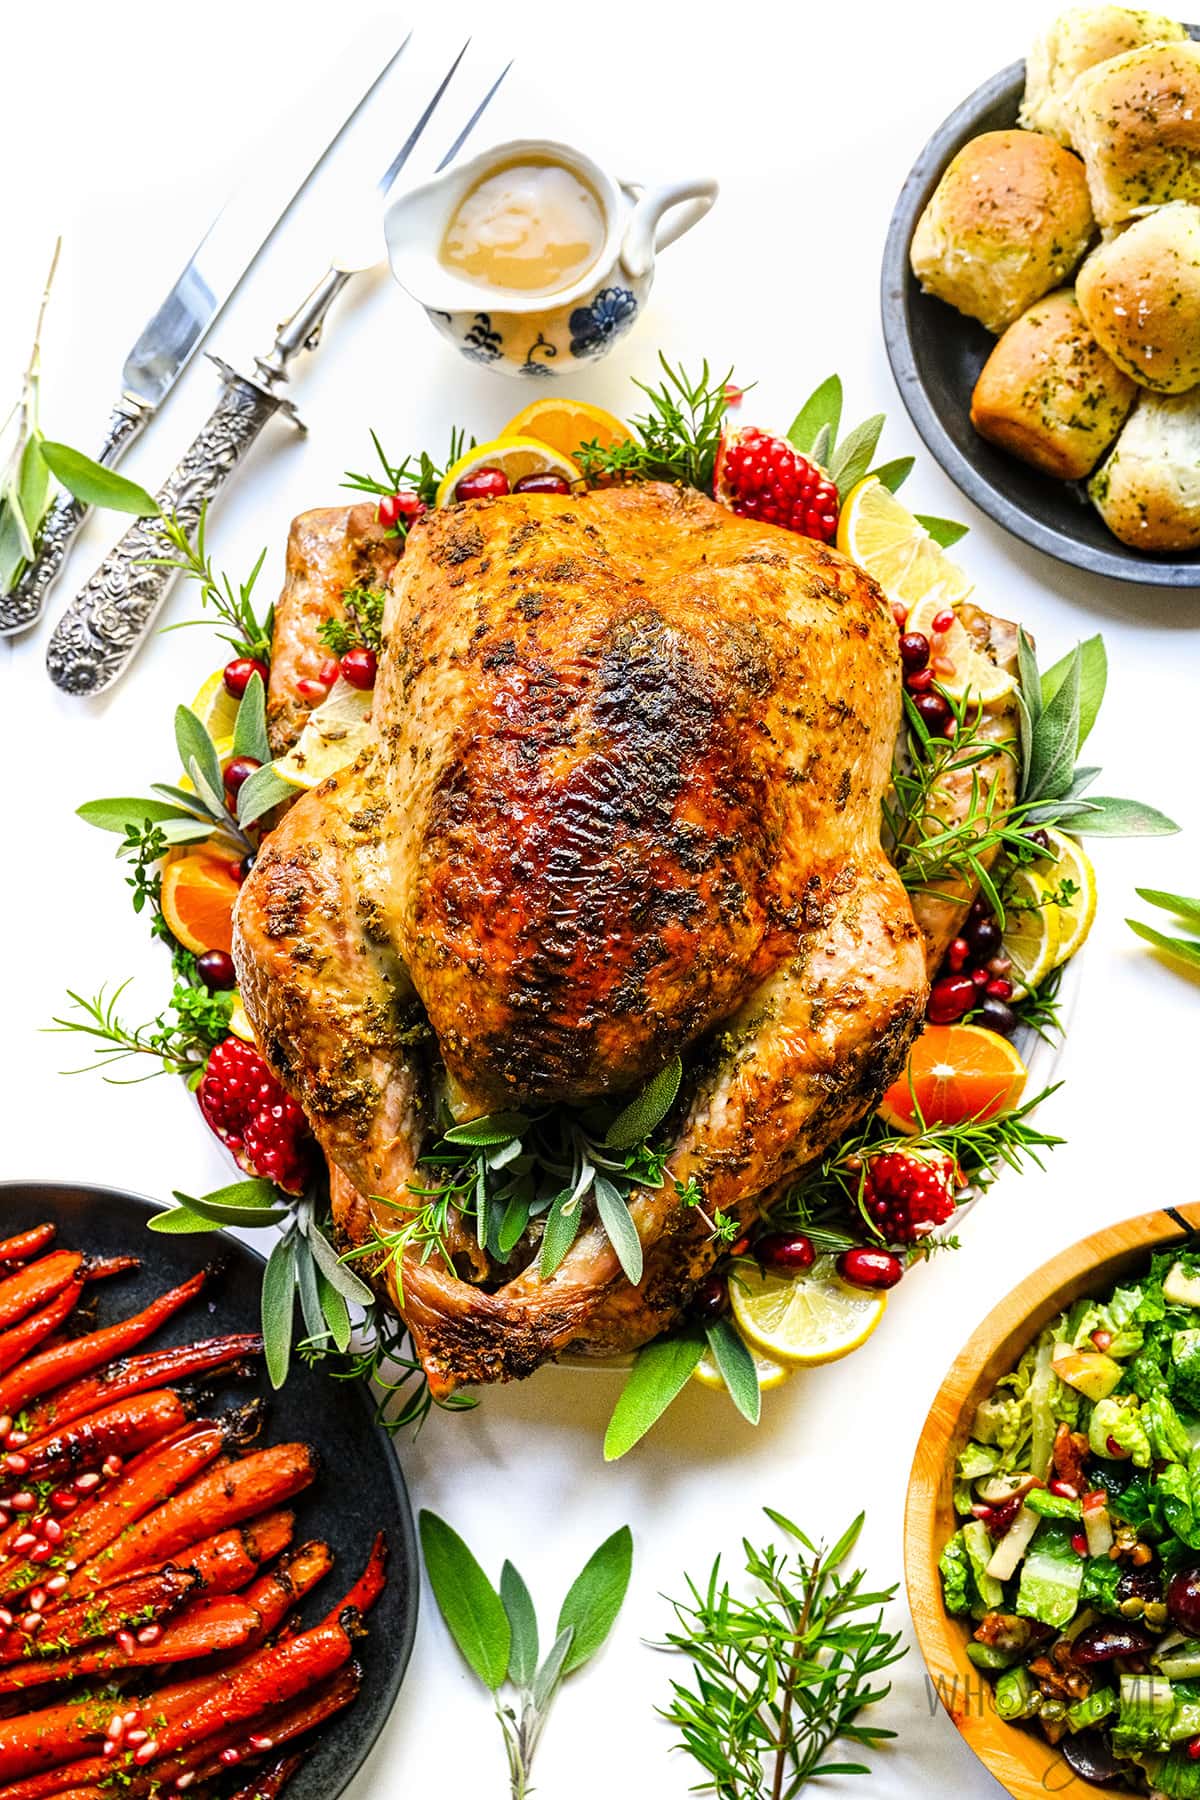 Roasted Thanksgiving Turkey Recipe + Video - Family Fresh Meals